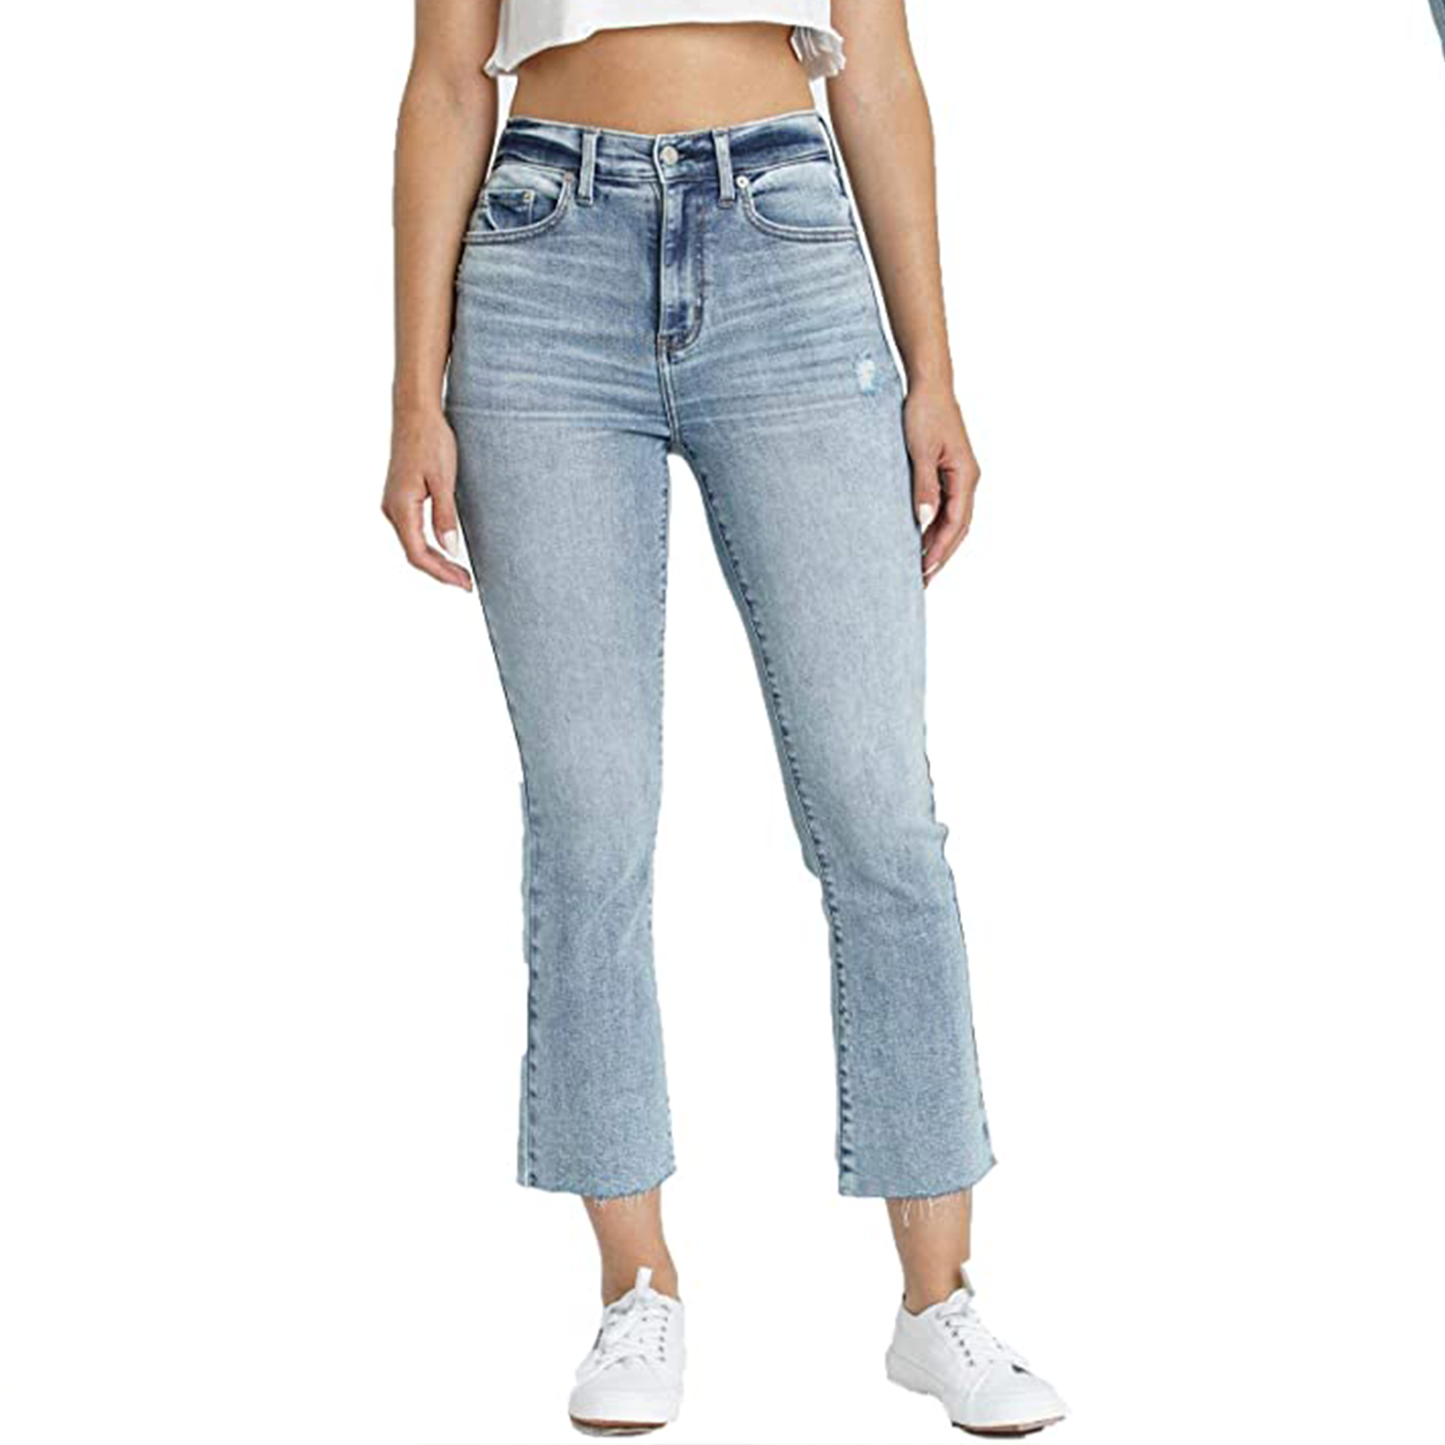 Daze Shy Girl High Rise Crop Flare. Complete your everyday look wearing these jeans. Fraying raw hems enhance the lived-in look of these high-waist jeans finished with cropped, flared legs